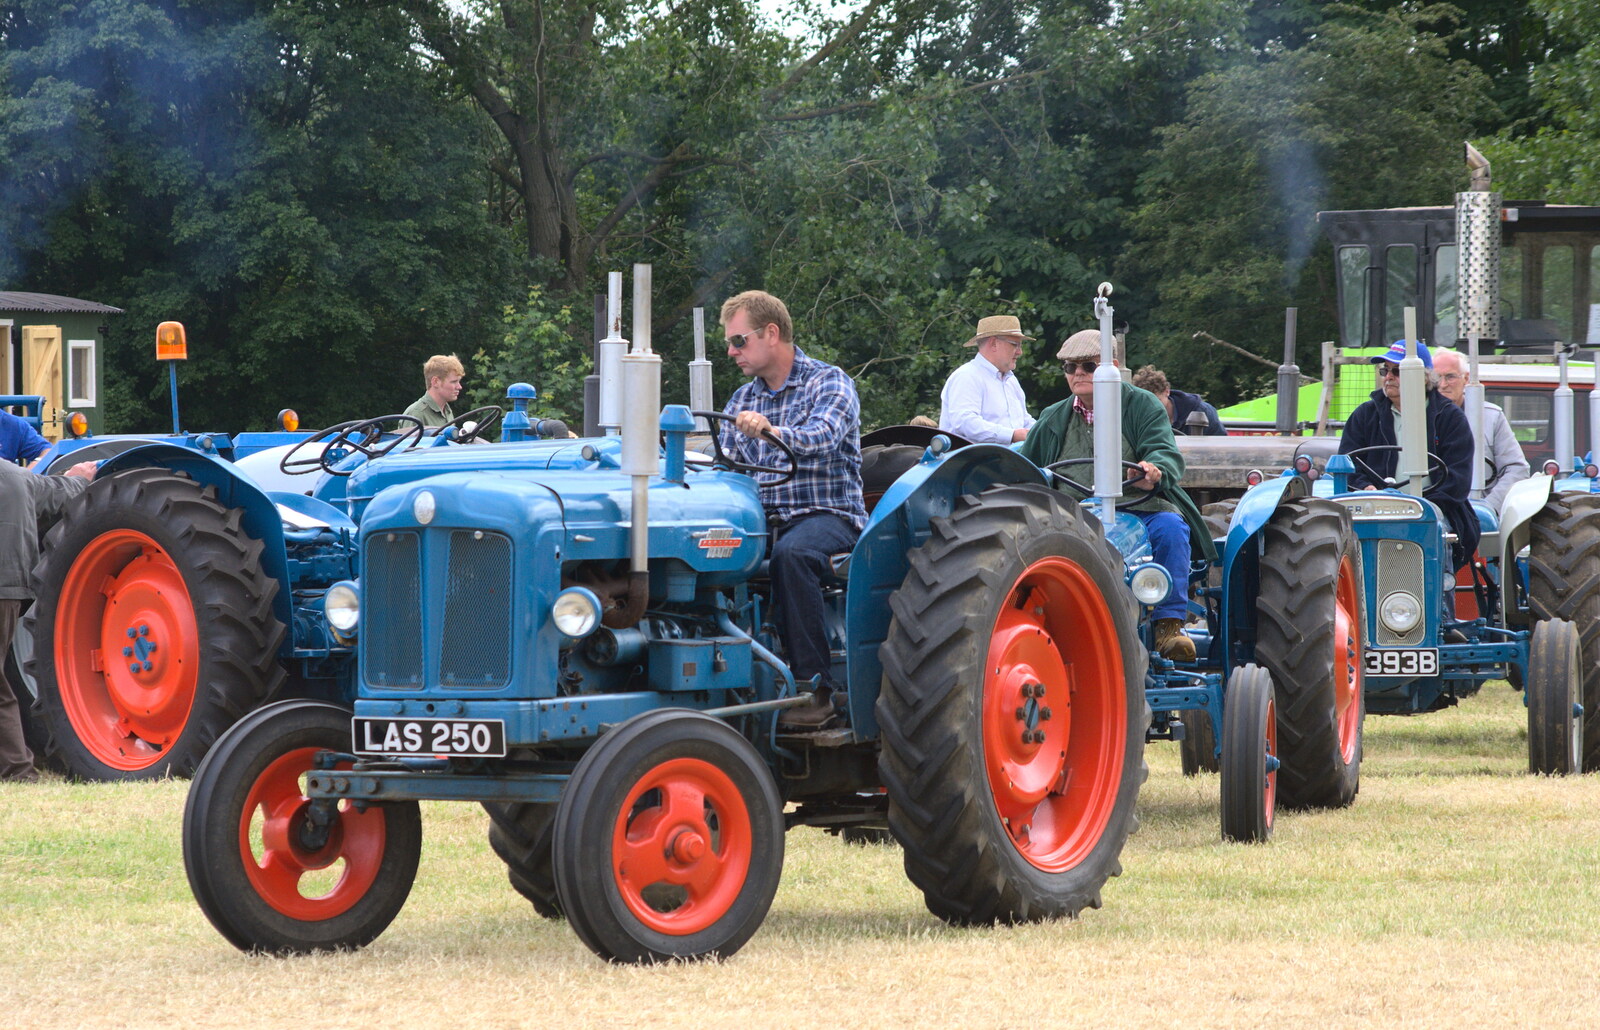 Andrew trundles around from A Vintage Tractorey Sort of Day, Palgrave, Suffolk - 21st June 2015